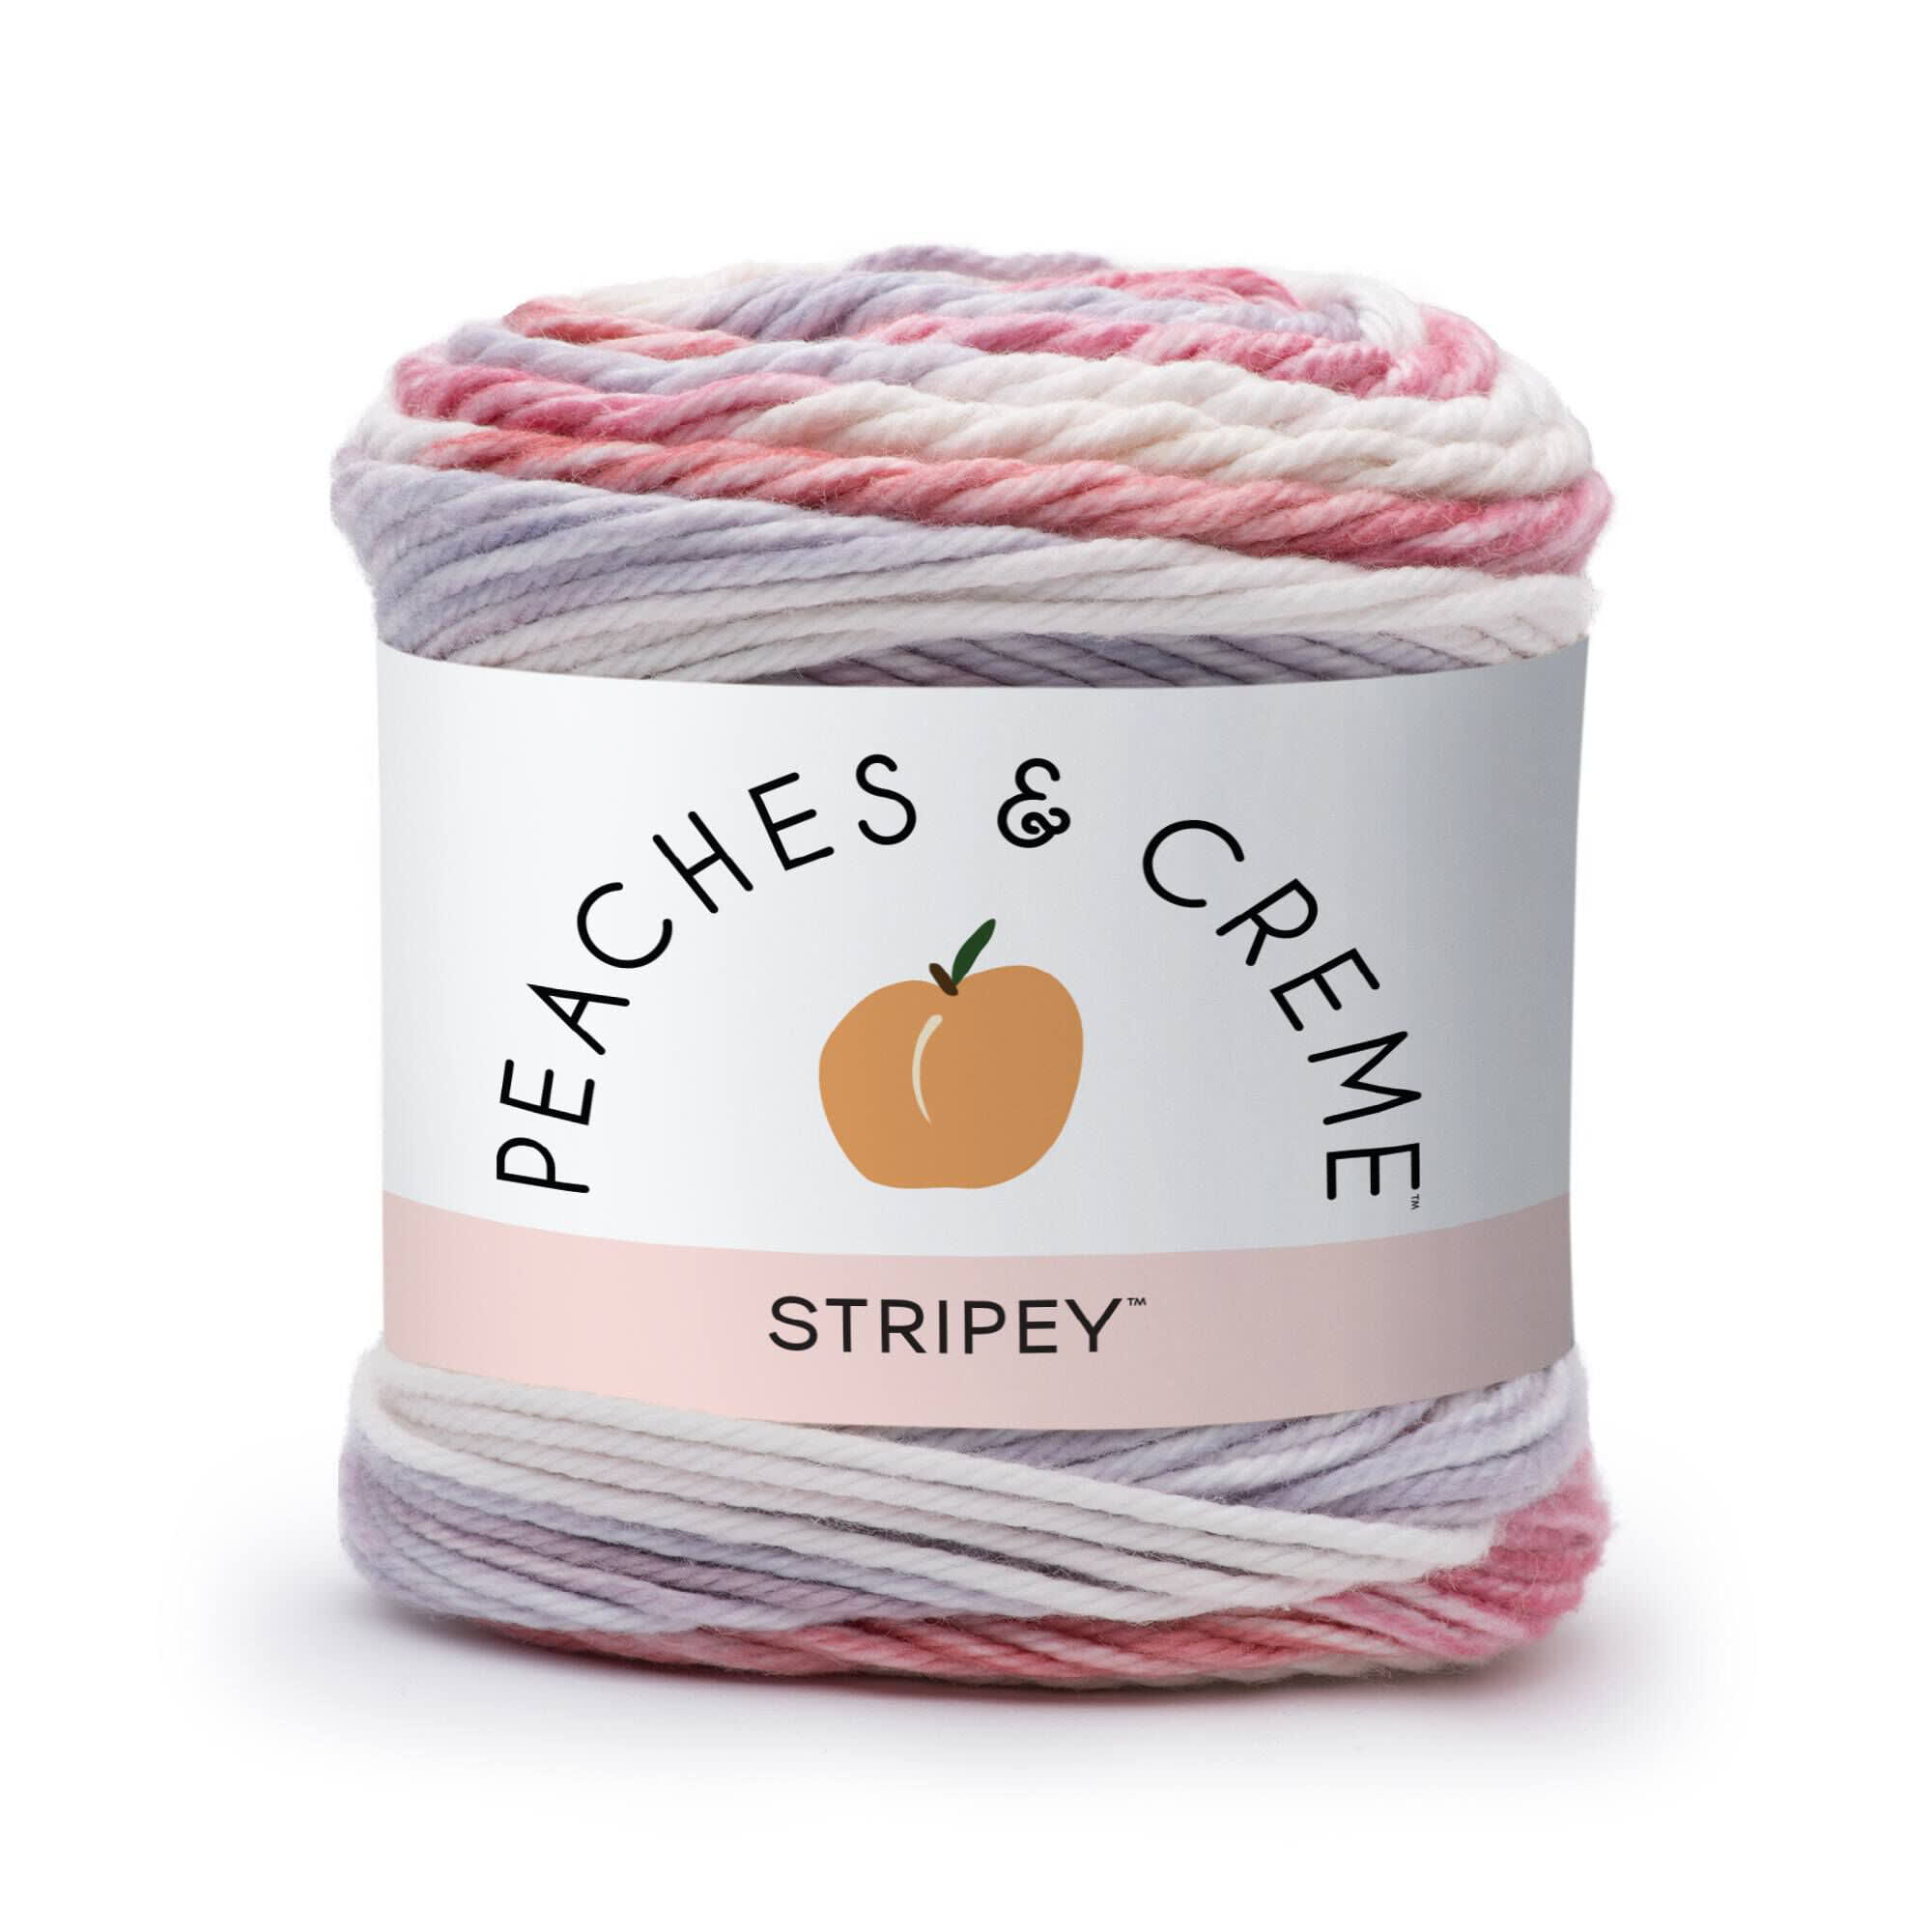 Peaches & Creme Solid 4 Medium Cotton Yarn, Black 2.5oz/70.9g, 120 Yards -  DroneUp Delivery